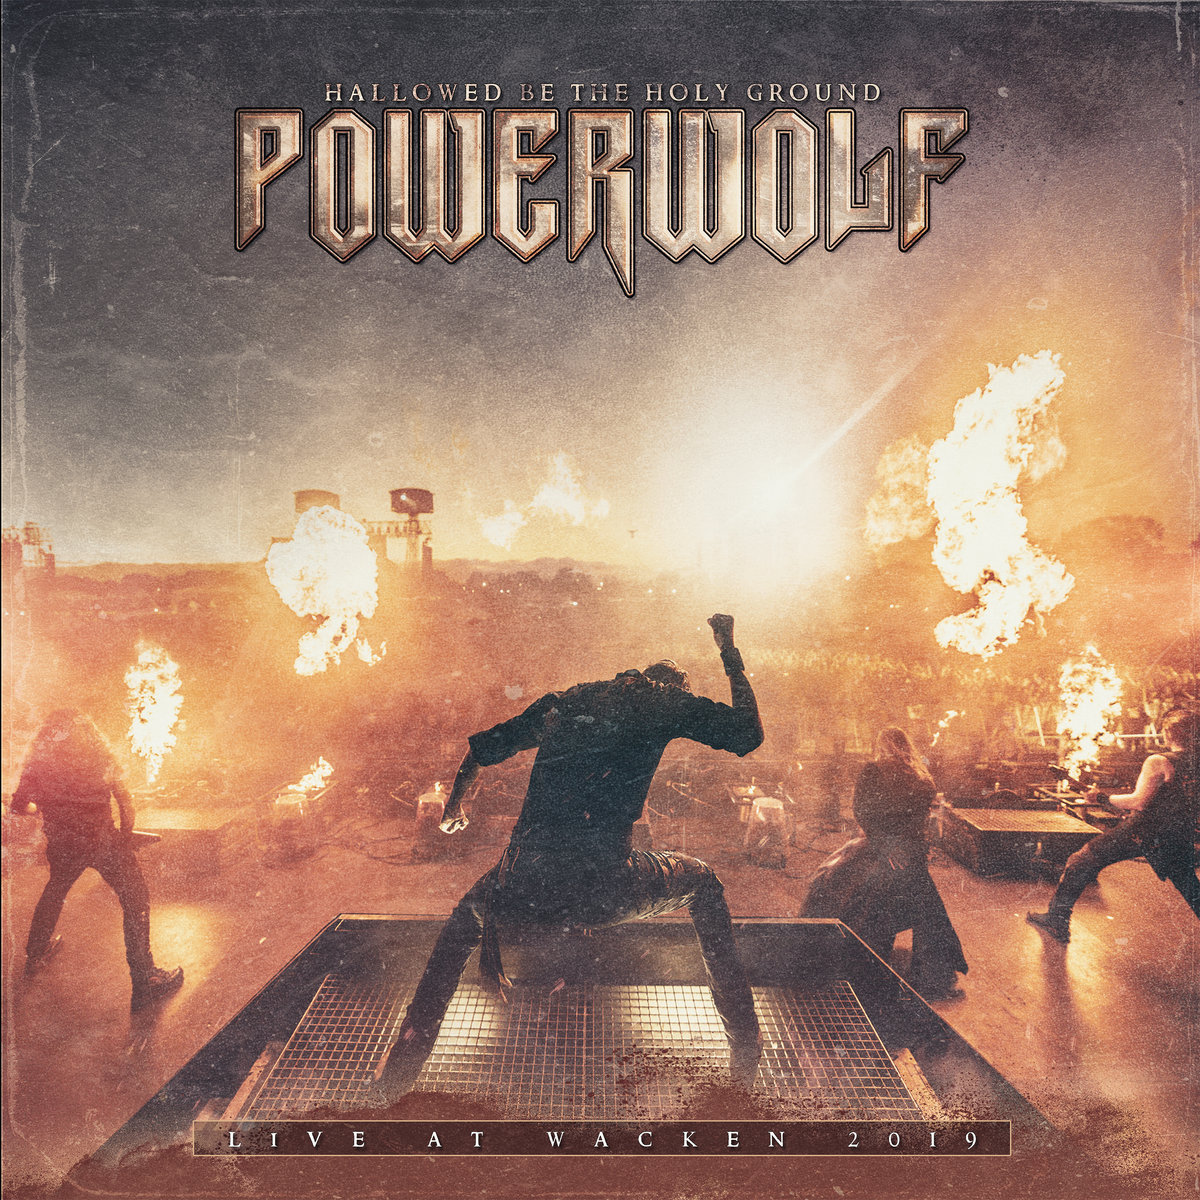 Hallowed Be The Holy Ground: Live At Wacken 2019 | Powerwolf